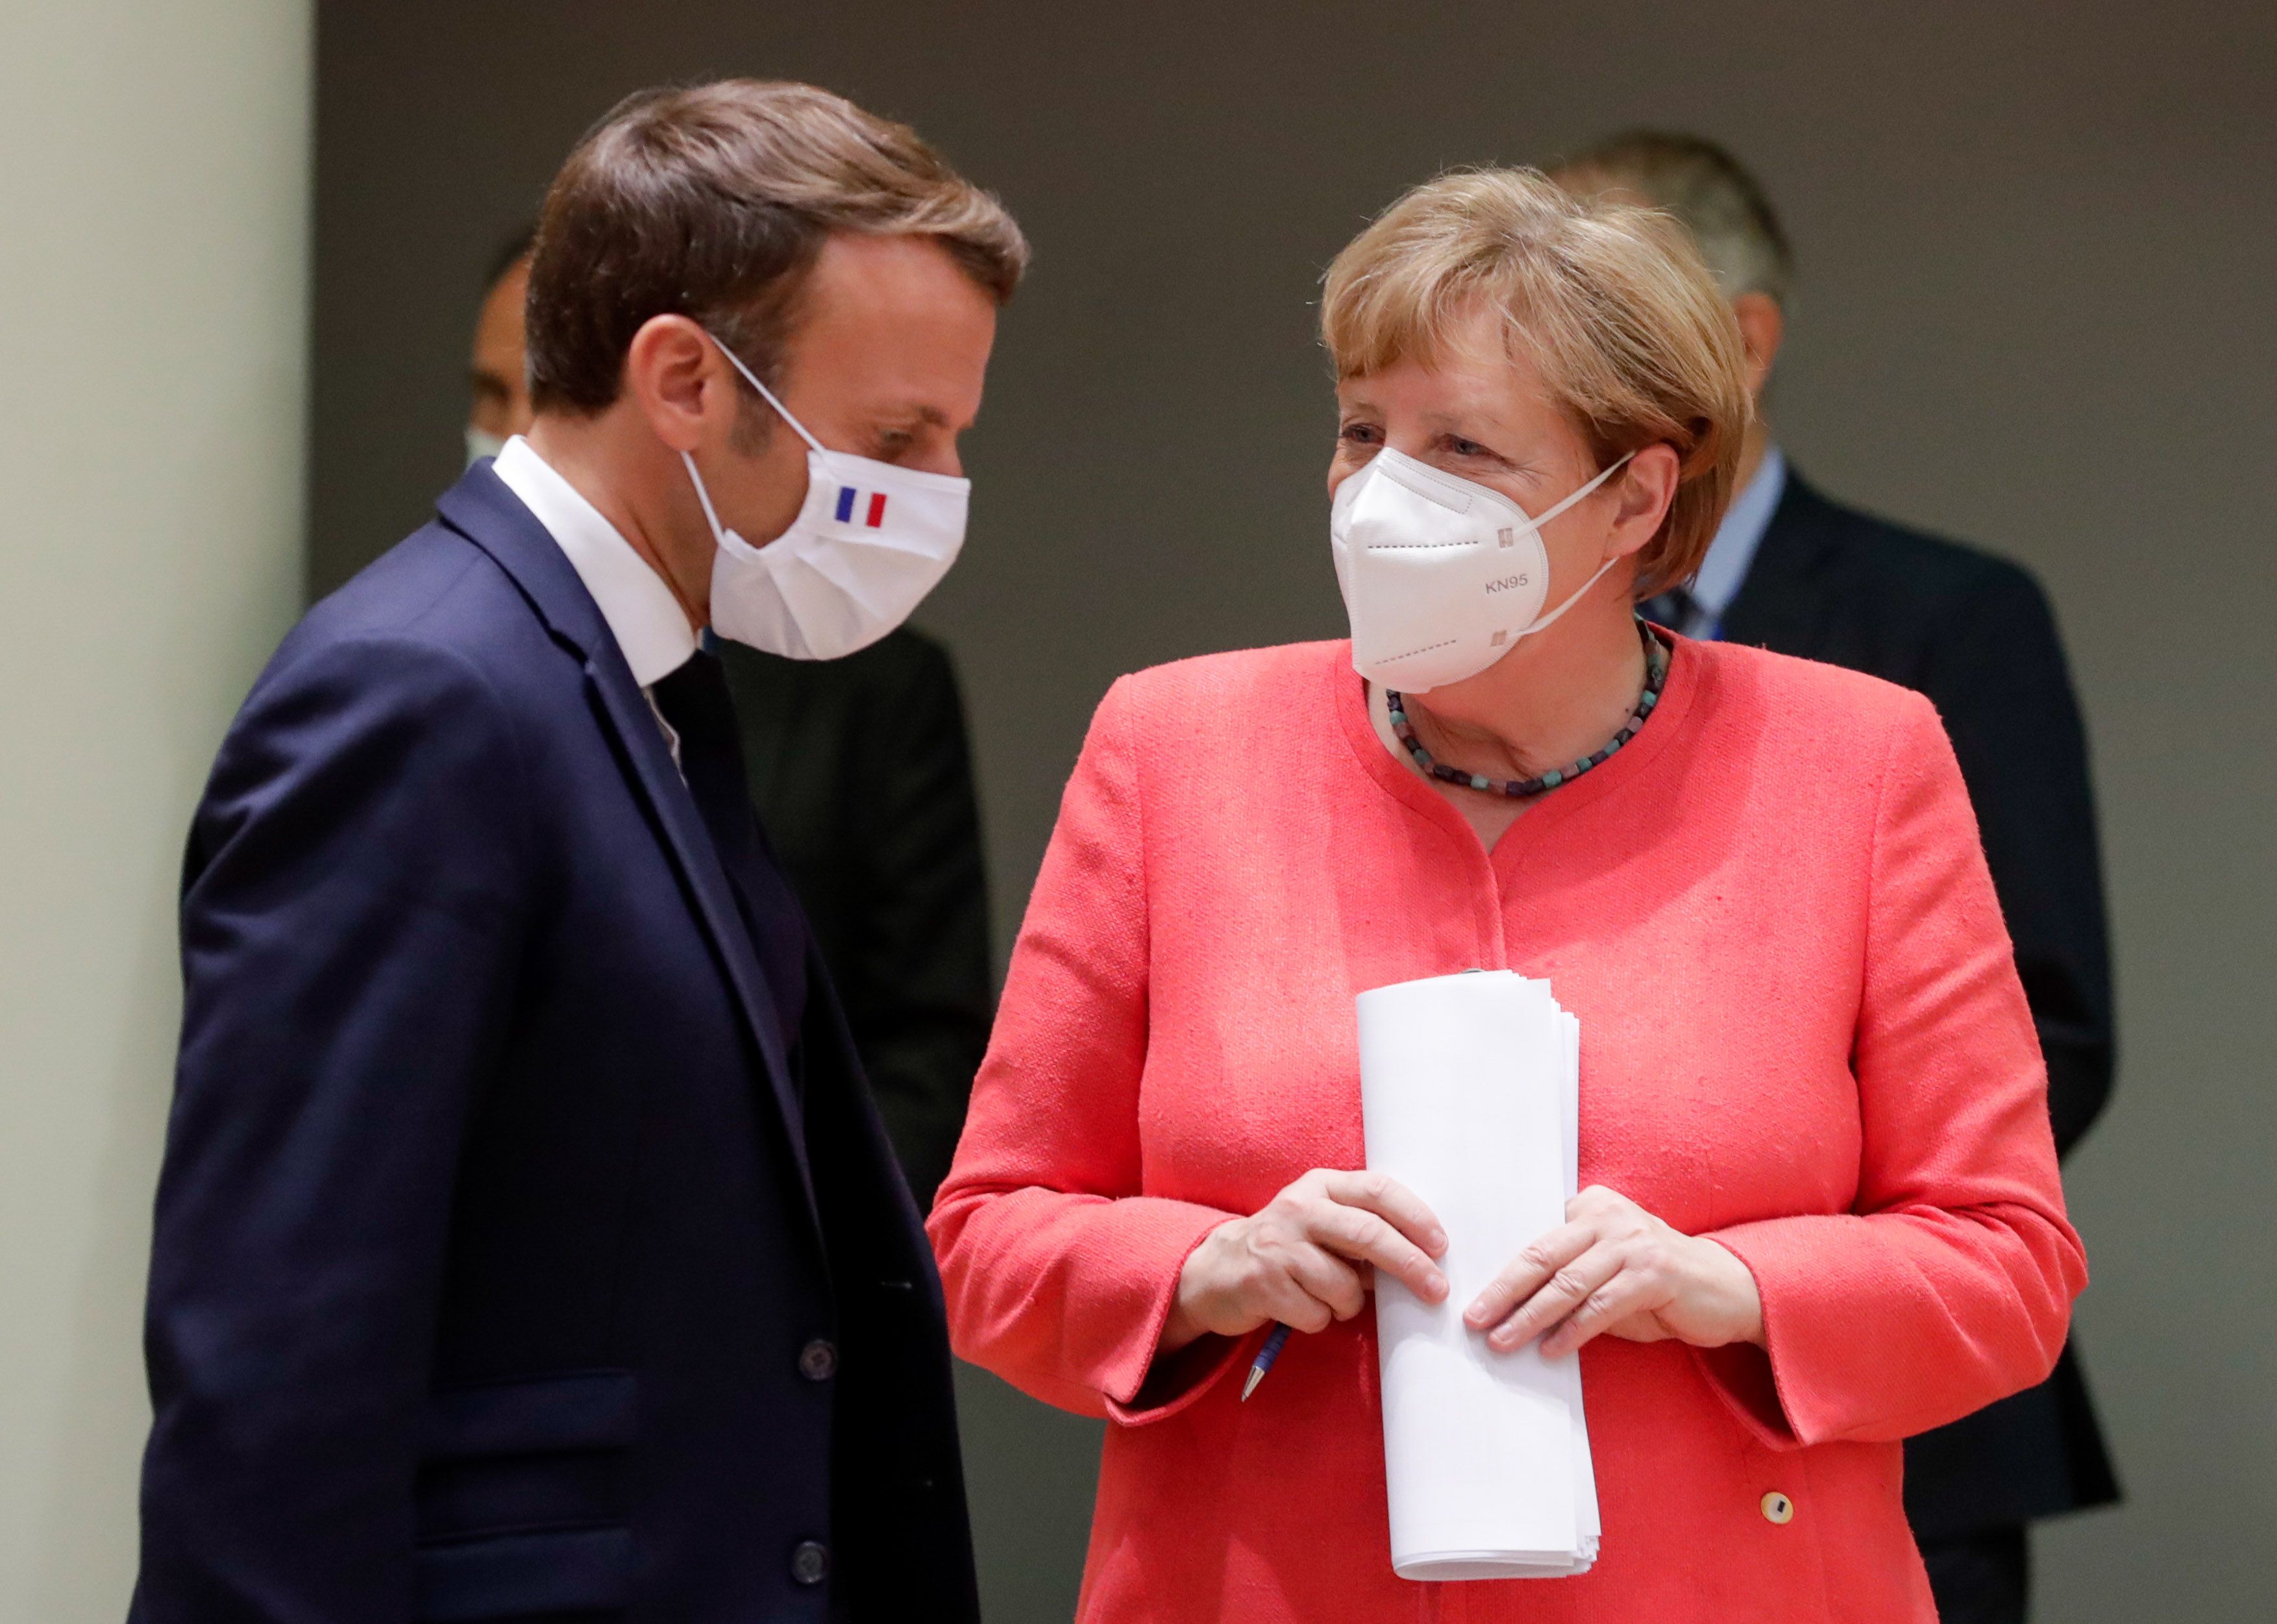 French President Emmanuel Macron and German Chancellor Angela Merkel during a last roundtable discussion following a four days European summit at the European Council in Brussels, Belgium on July 21